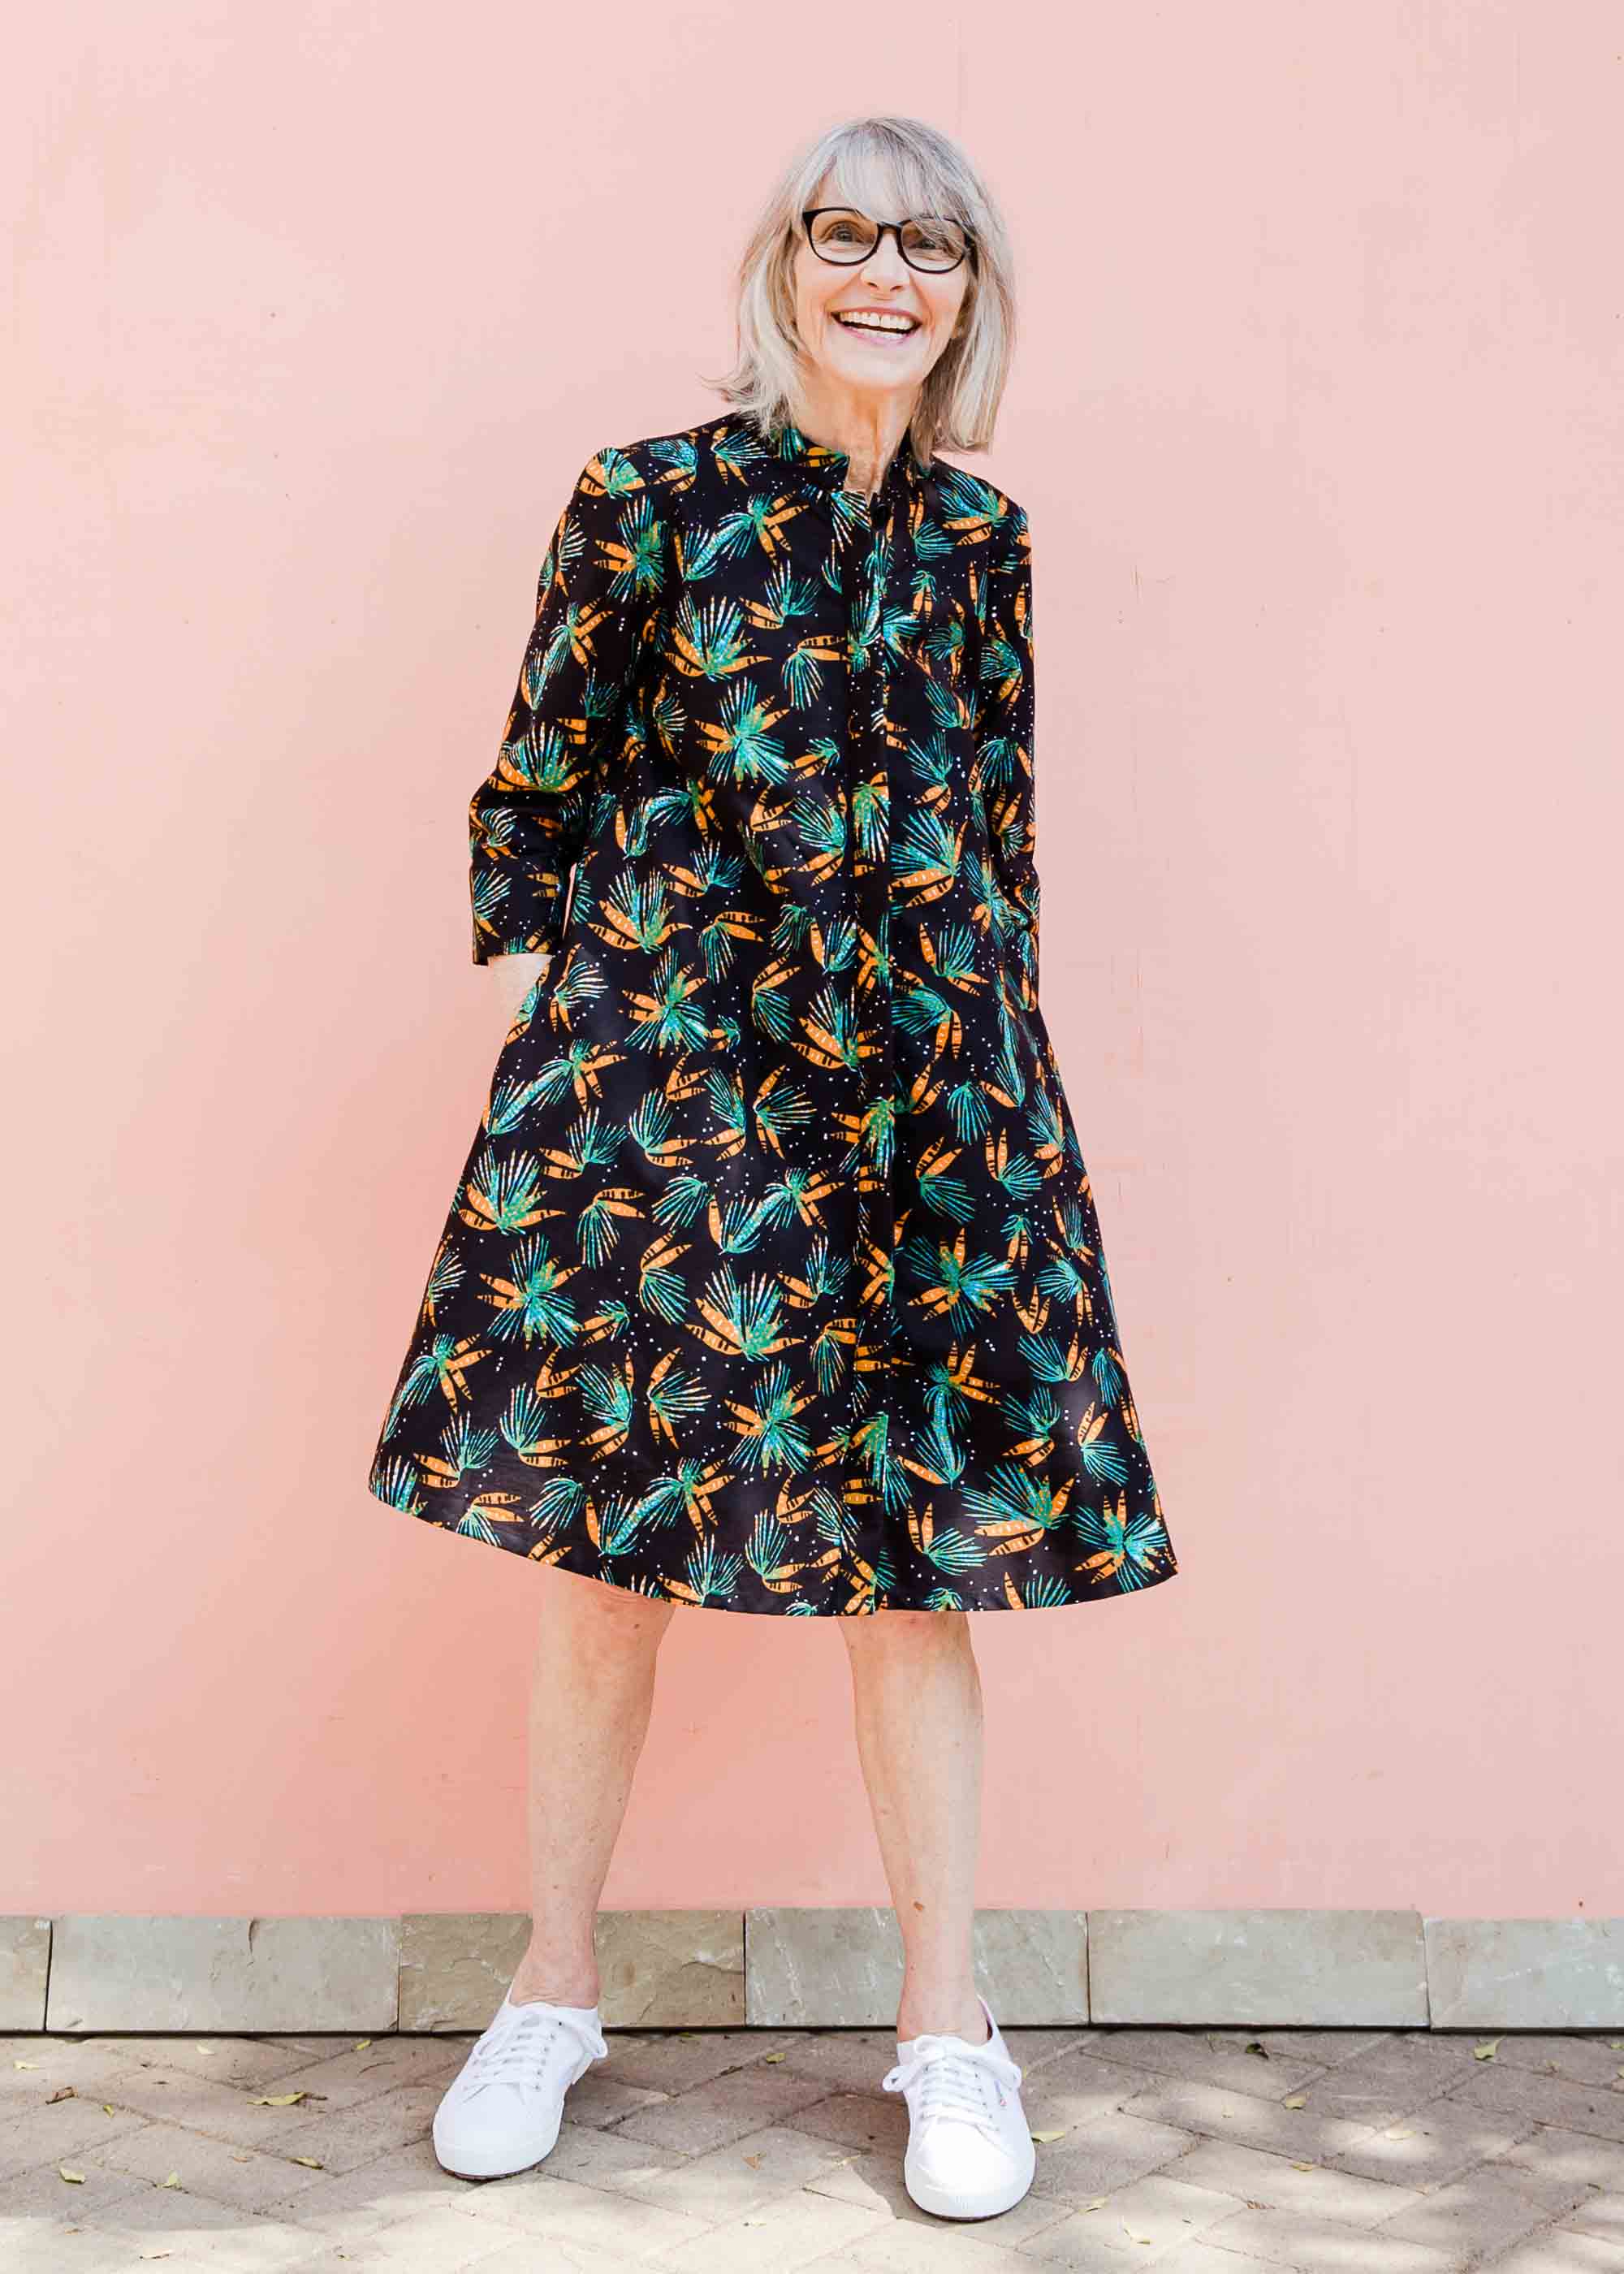 Model wearing black dress with teal and orange leaves with white dots